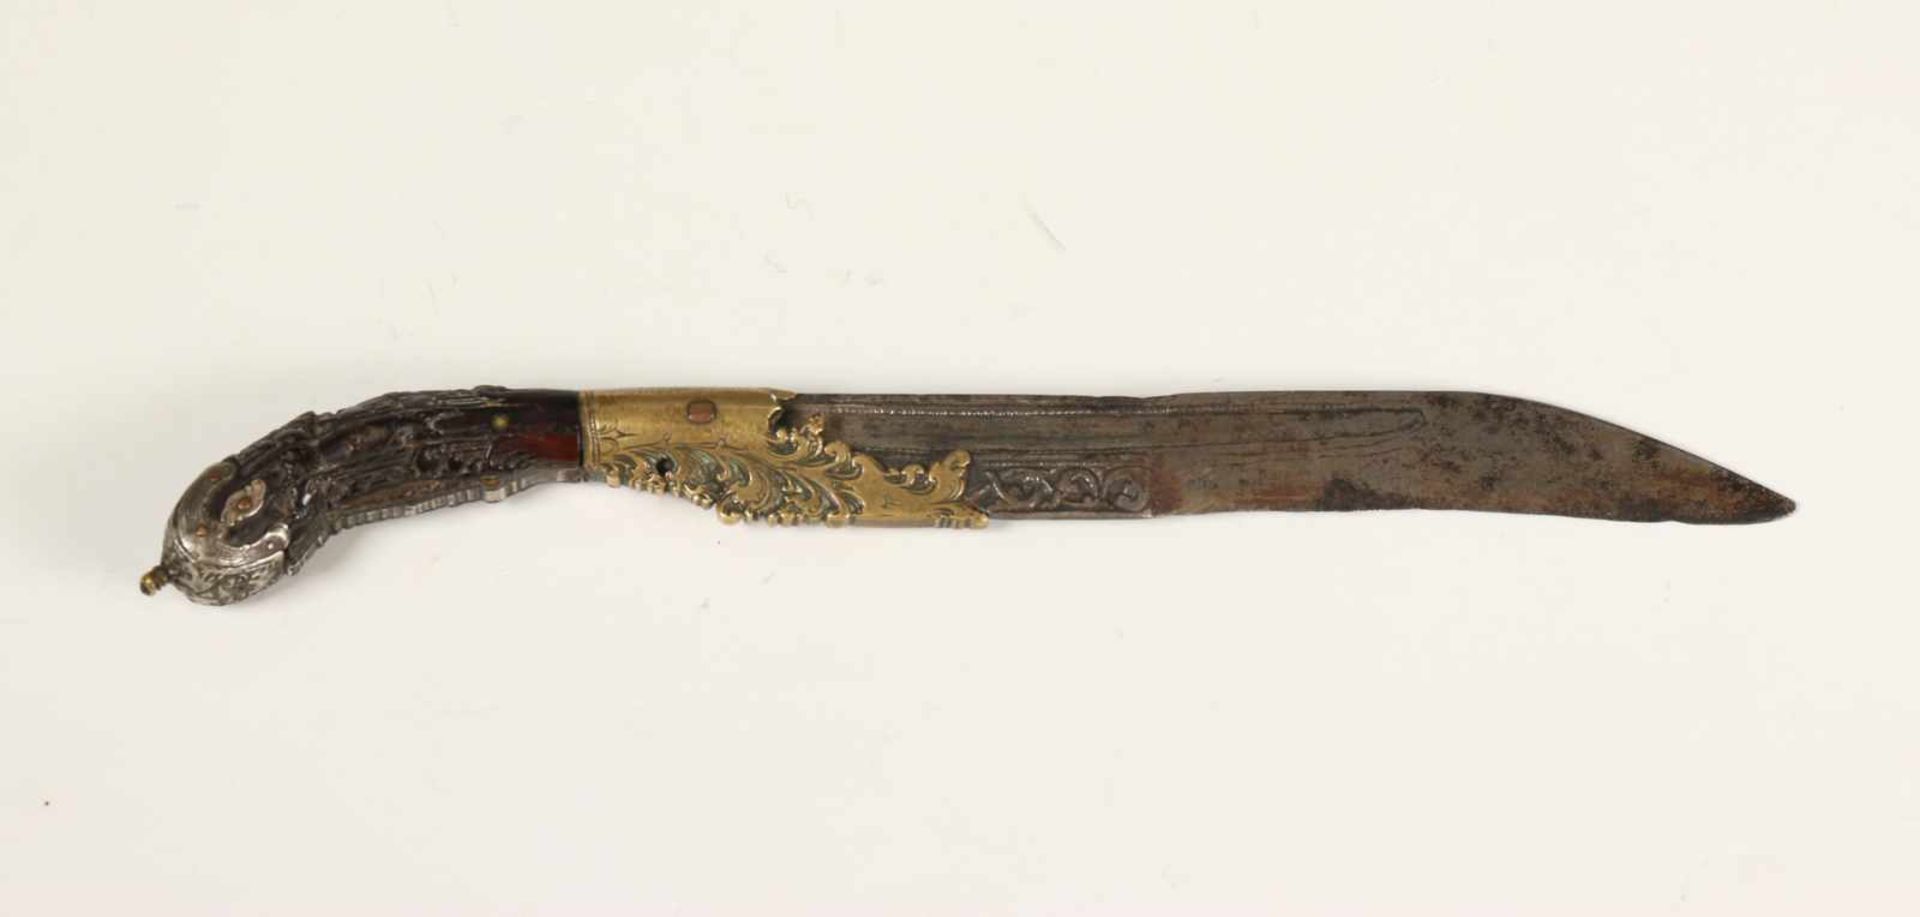 Indonesia, Sumatra, royal dagger, ca. 1900,with finely carved horn handle and details in silver. The - Bild 4 aus 4